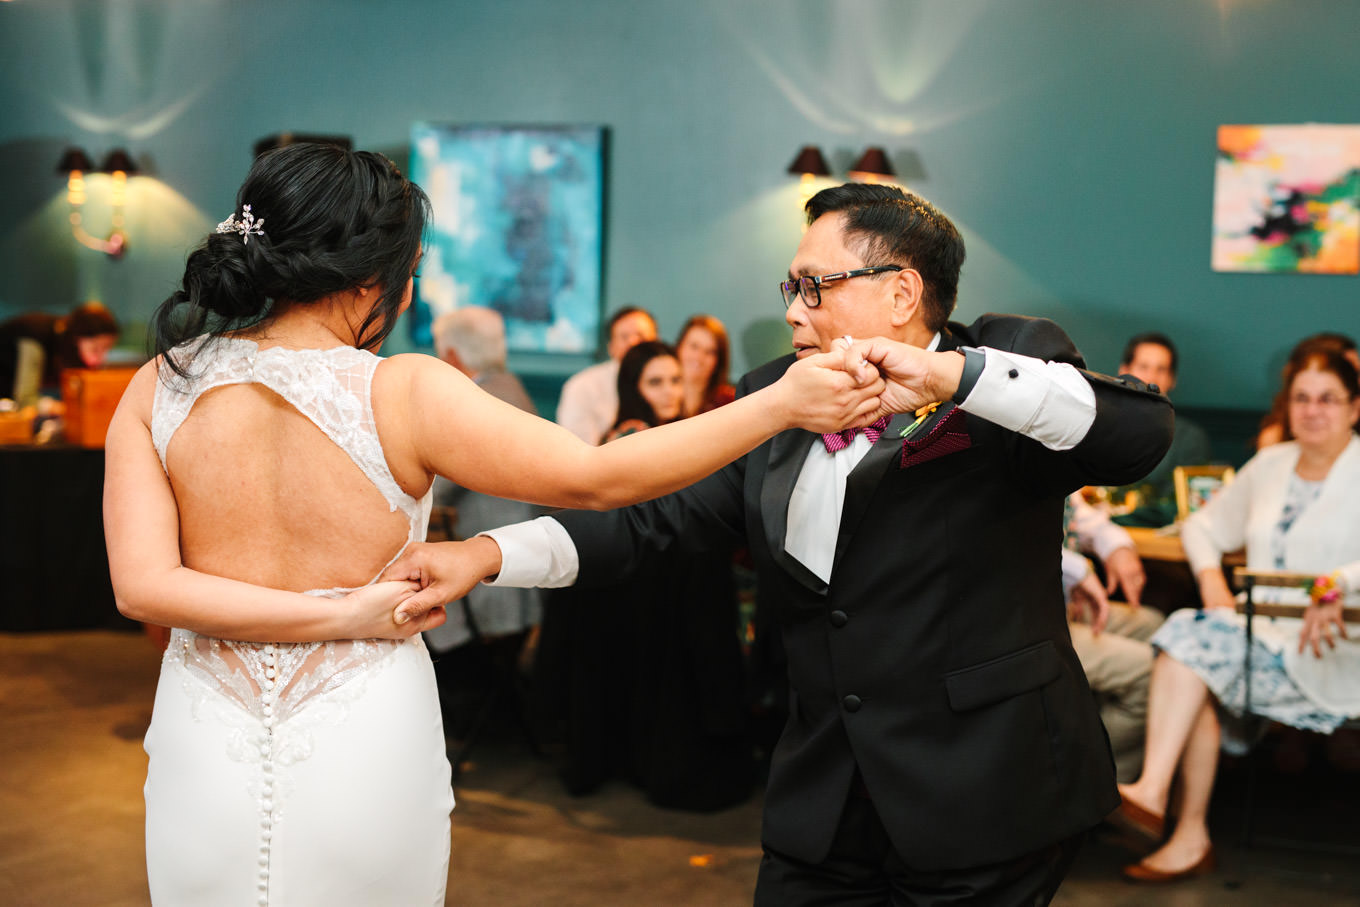 Bride and dad dancing at wedding | TV inspired wedding at The Fig House Los Angeles | Published on The Knot | Fresh and colorful photography for fun-loving couples in Southern California | #losangeleswedding #TVwedding #colorfulwedding #theknot   Source: Mary Costa Photography | Los Angeles wedding photographer